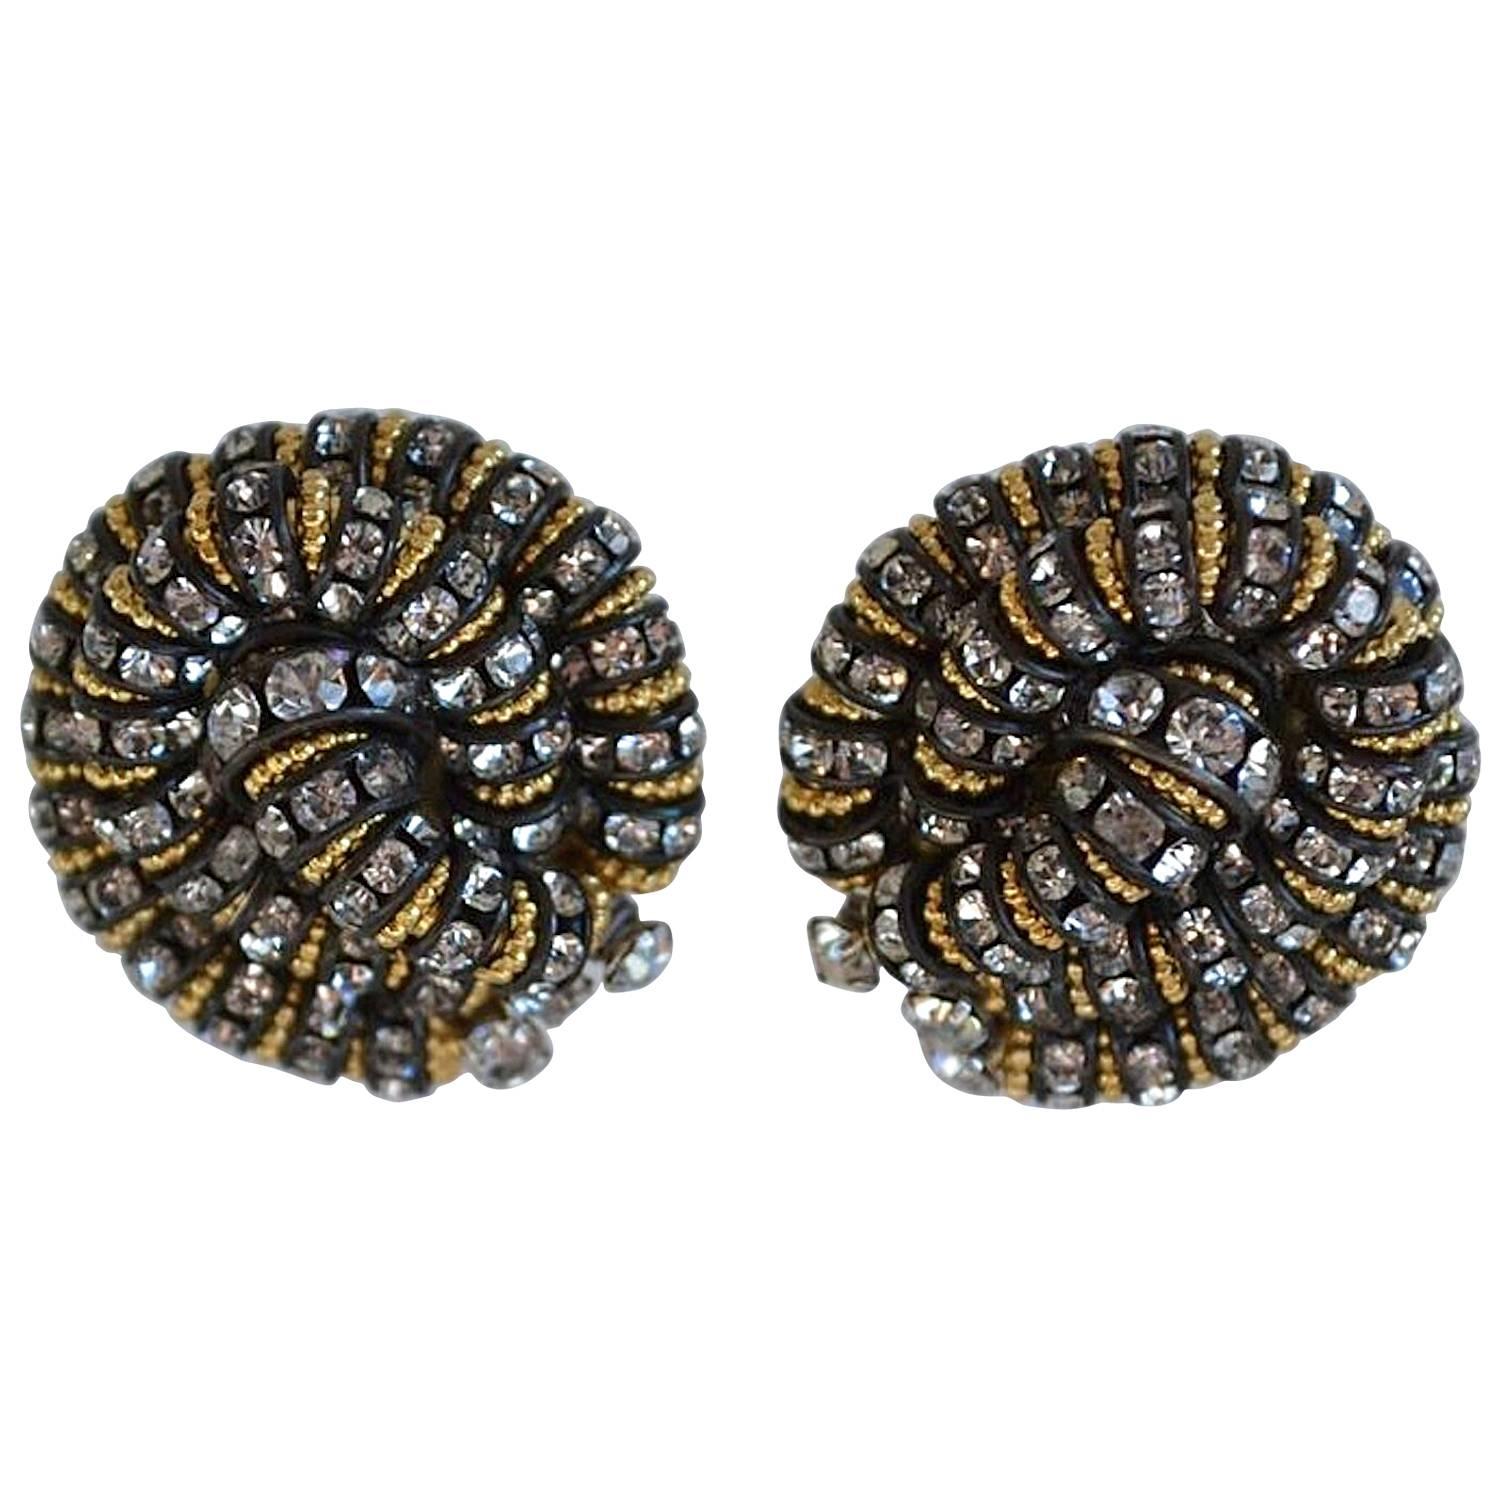 Francoise Montague "Vendome" Black, Gold, and Crystal Button Clip Earrings